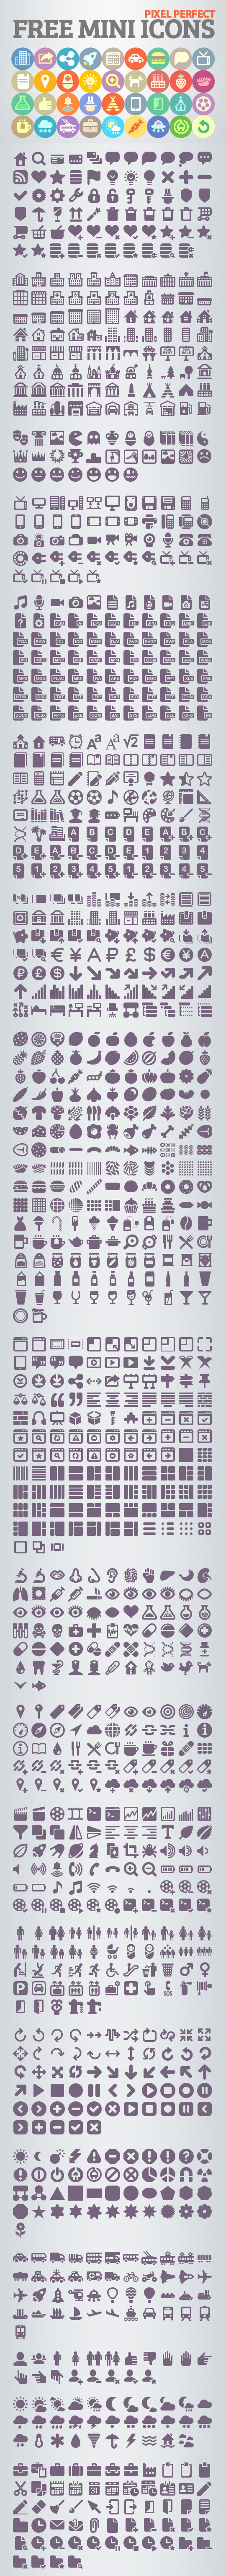 Free-Flat-Mini-Icons-Preview